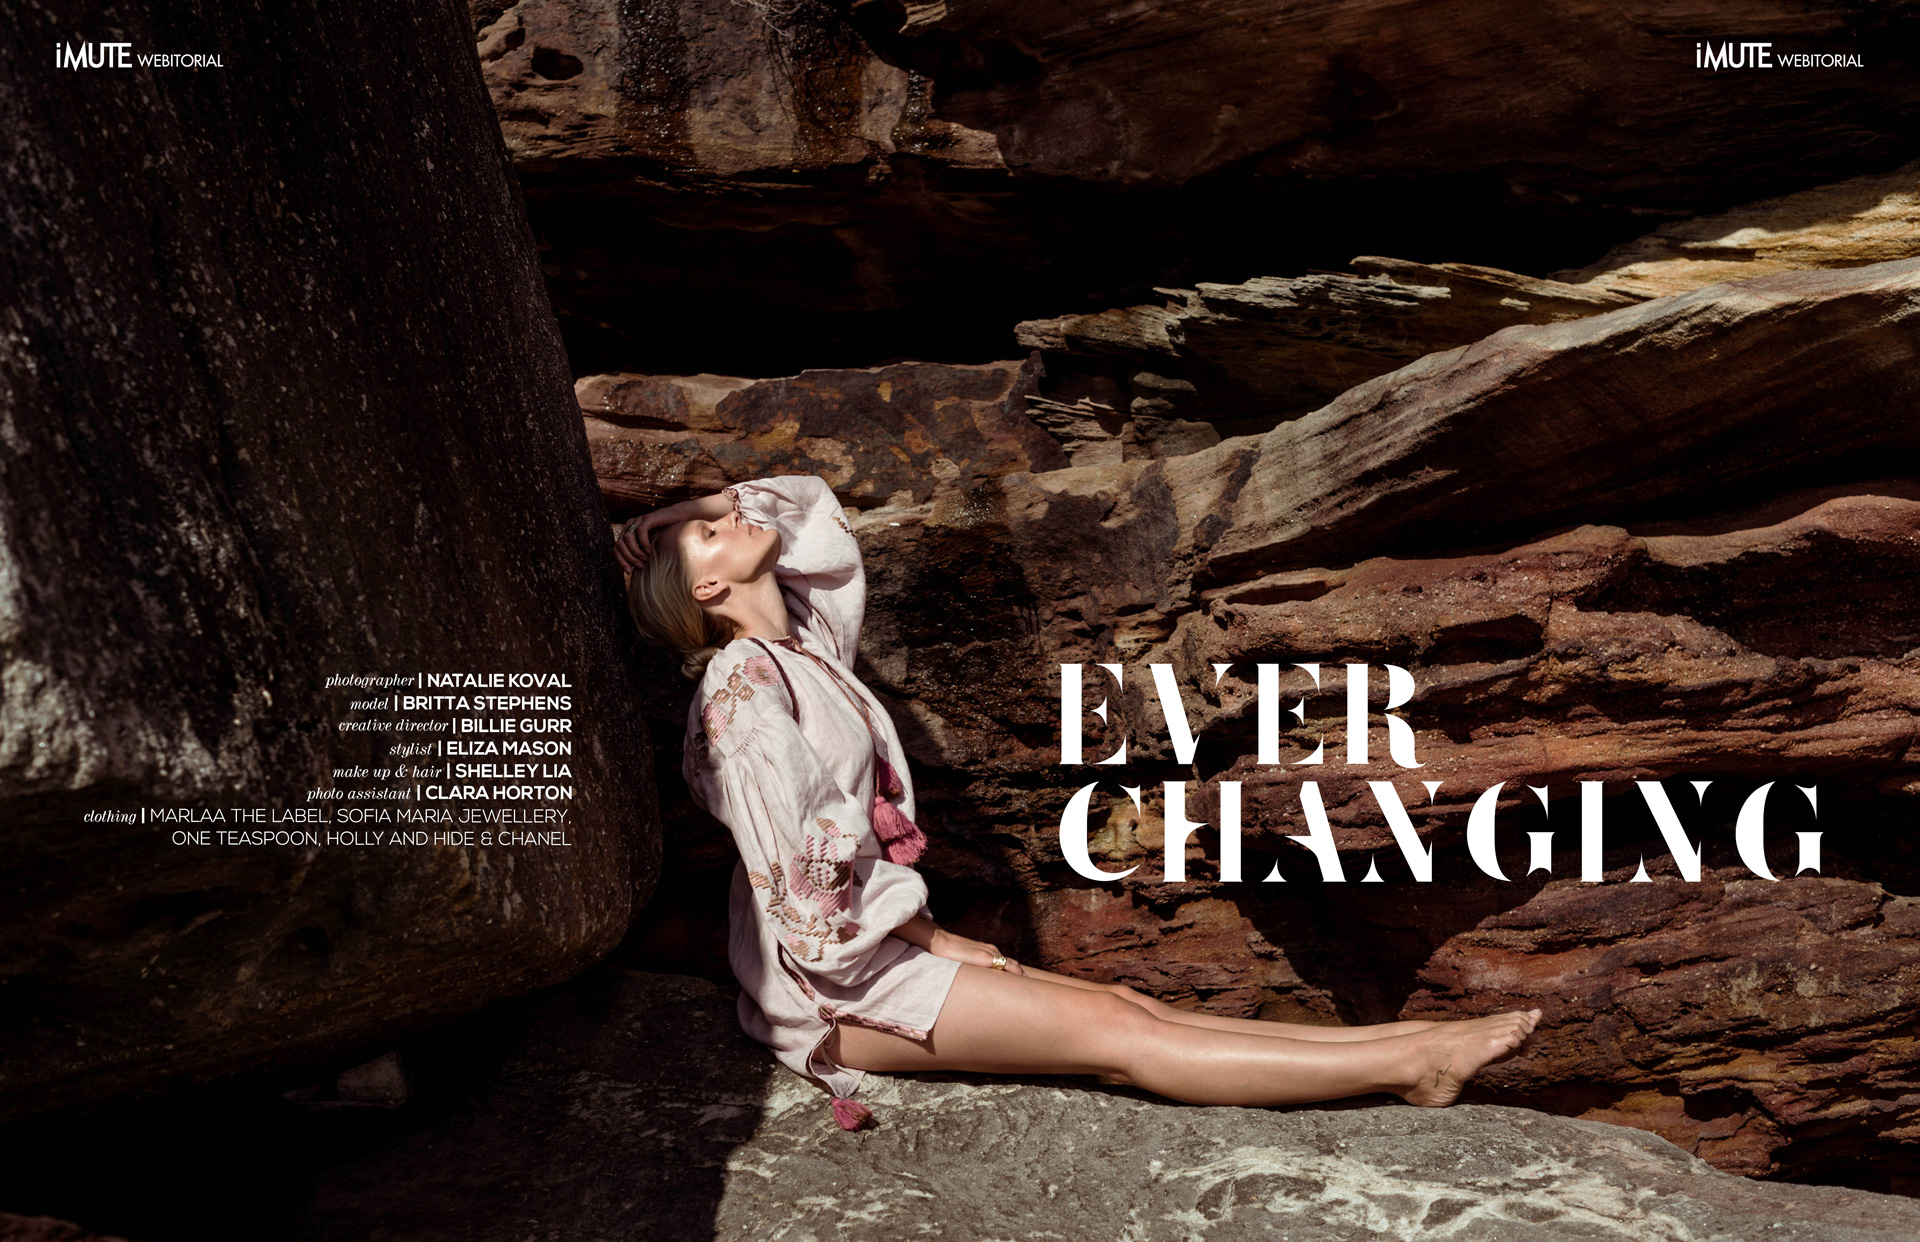 'Ever-Changing' Webitorial featured in iMute Magazine